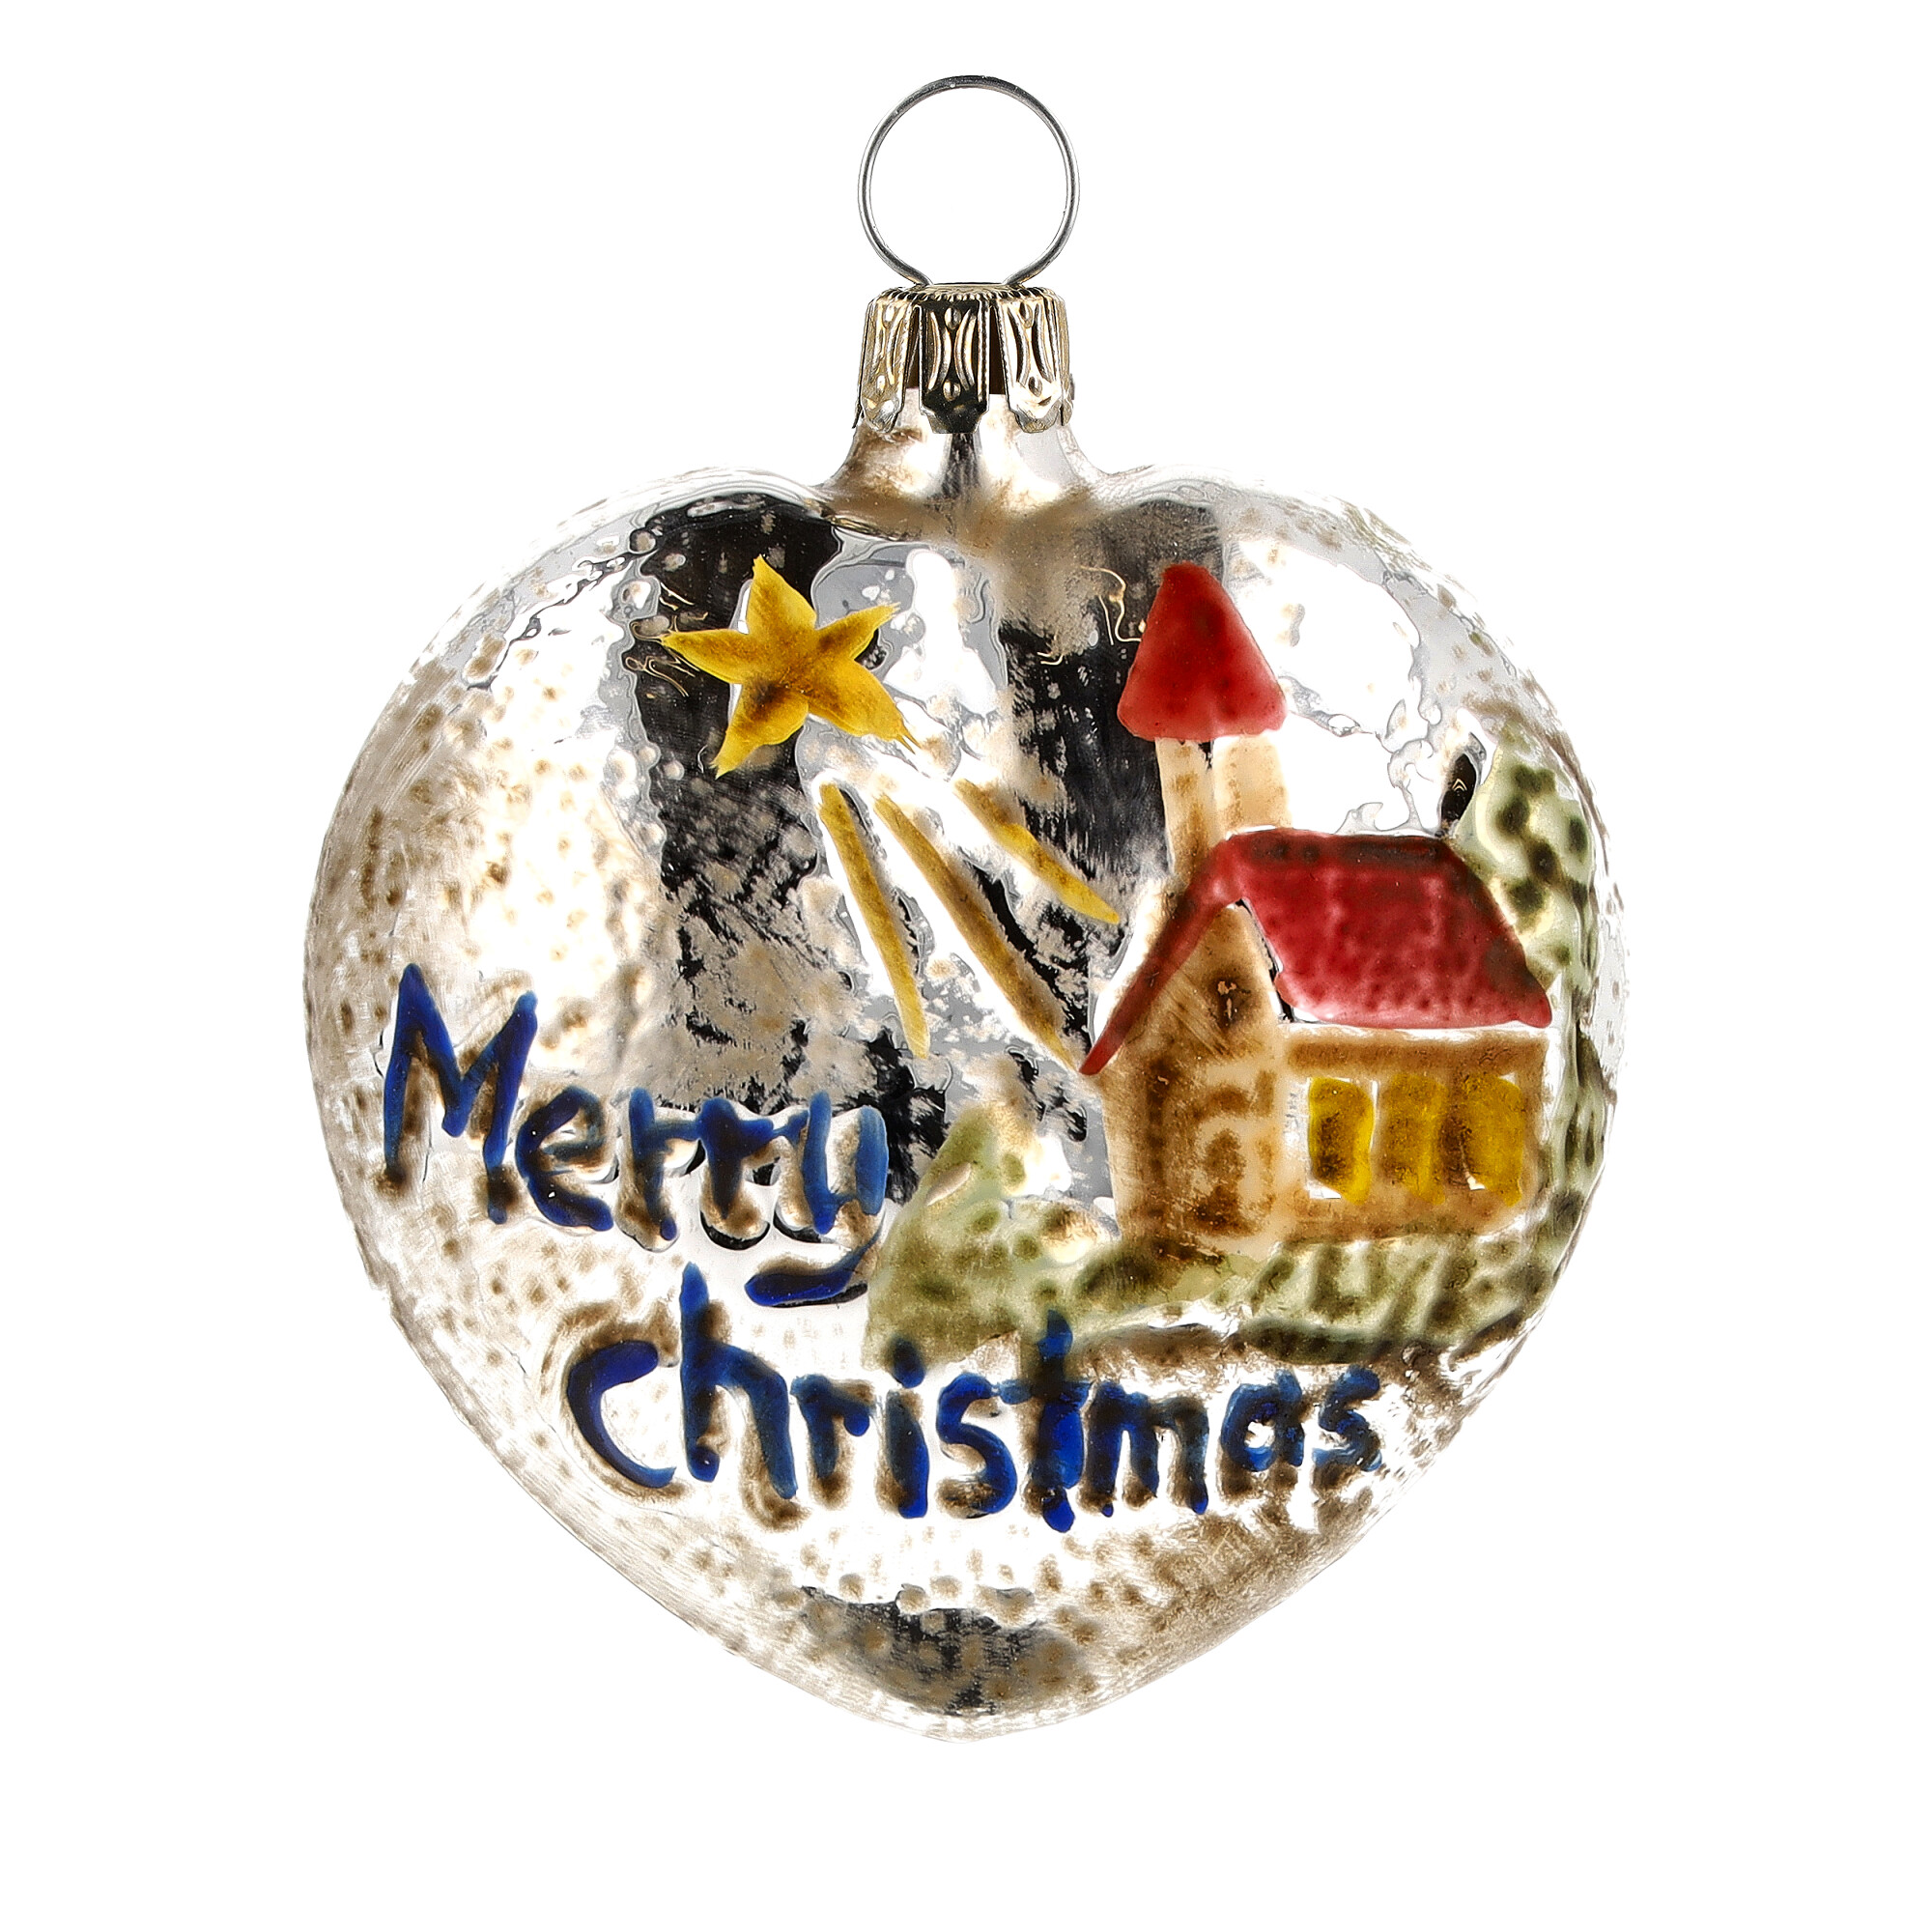 Retro Vintage style Christmas Glass Ornament - Heart with church and stars red roof